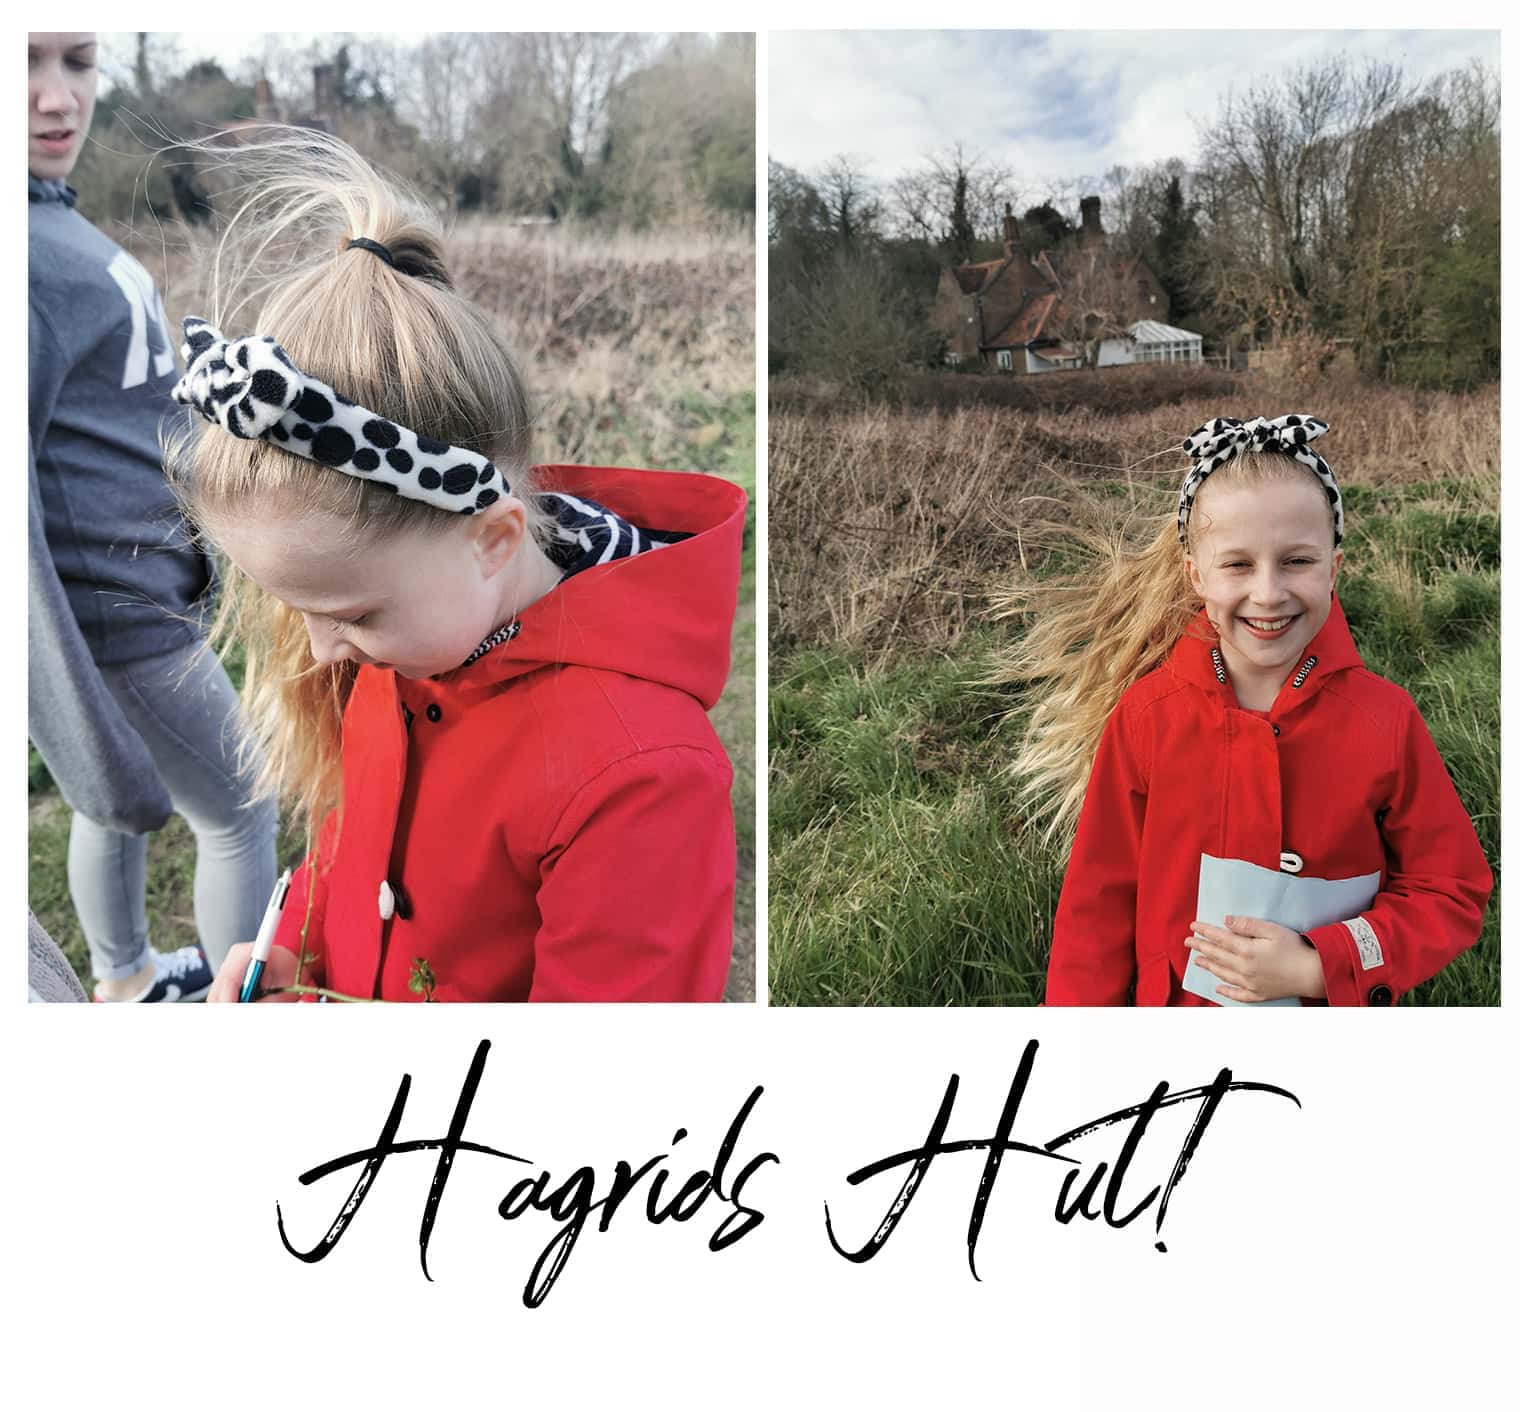 Scavenger hunt, Harry potter inspired, Forbidden forest inspired, house, chislehurst, things to do with the kids, ashleigh shea photography